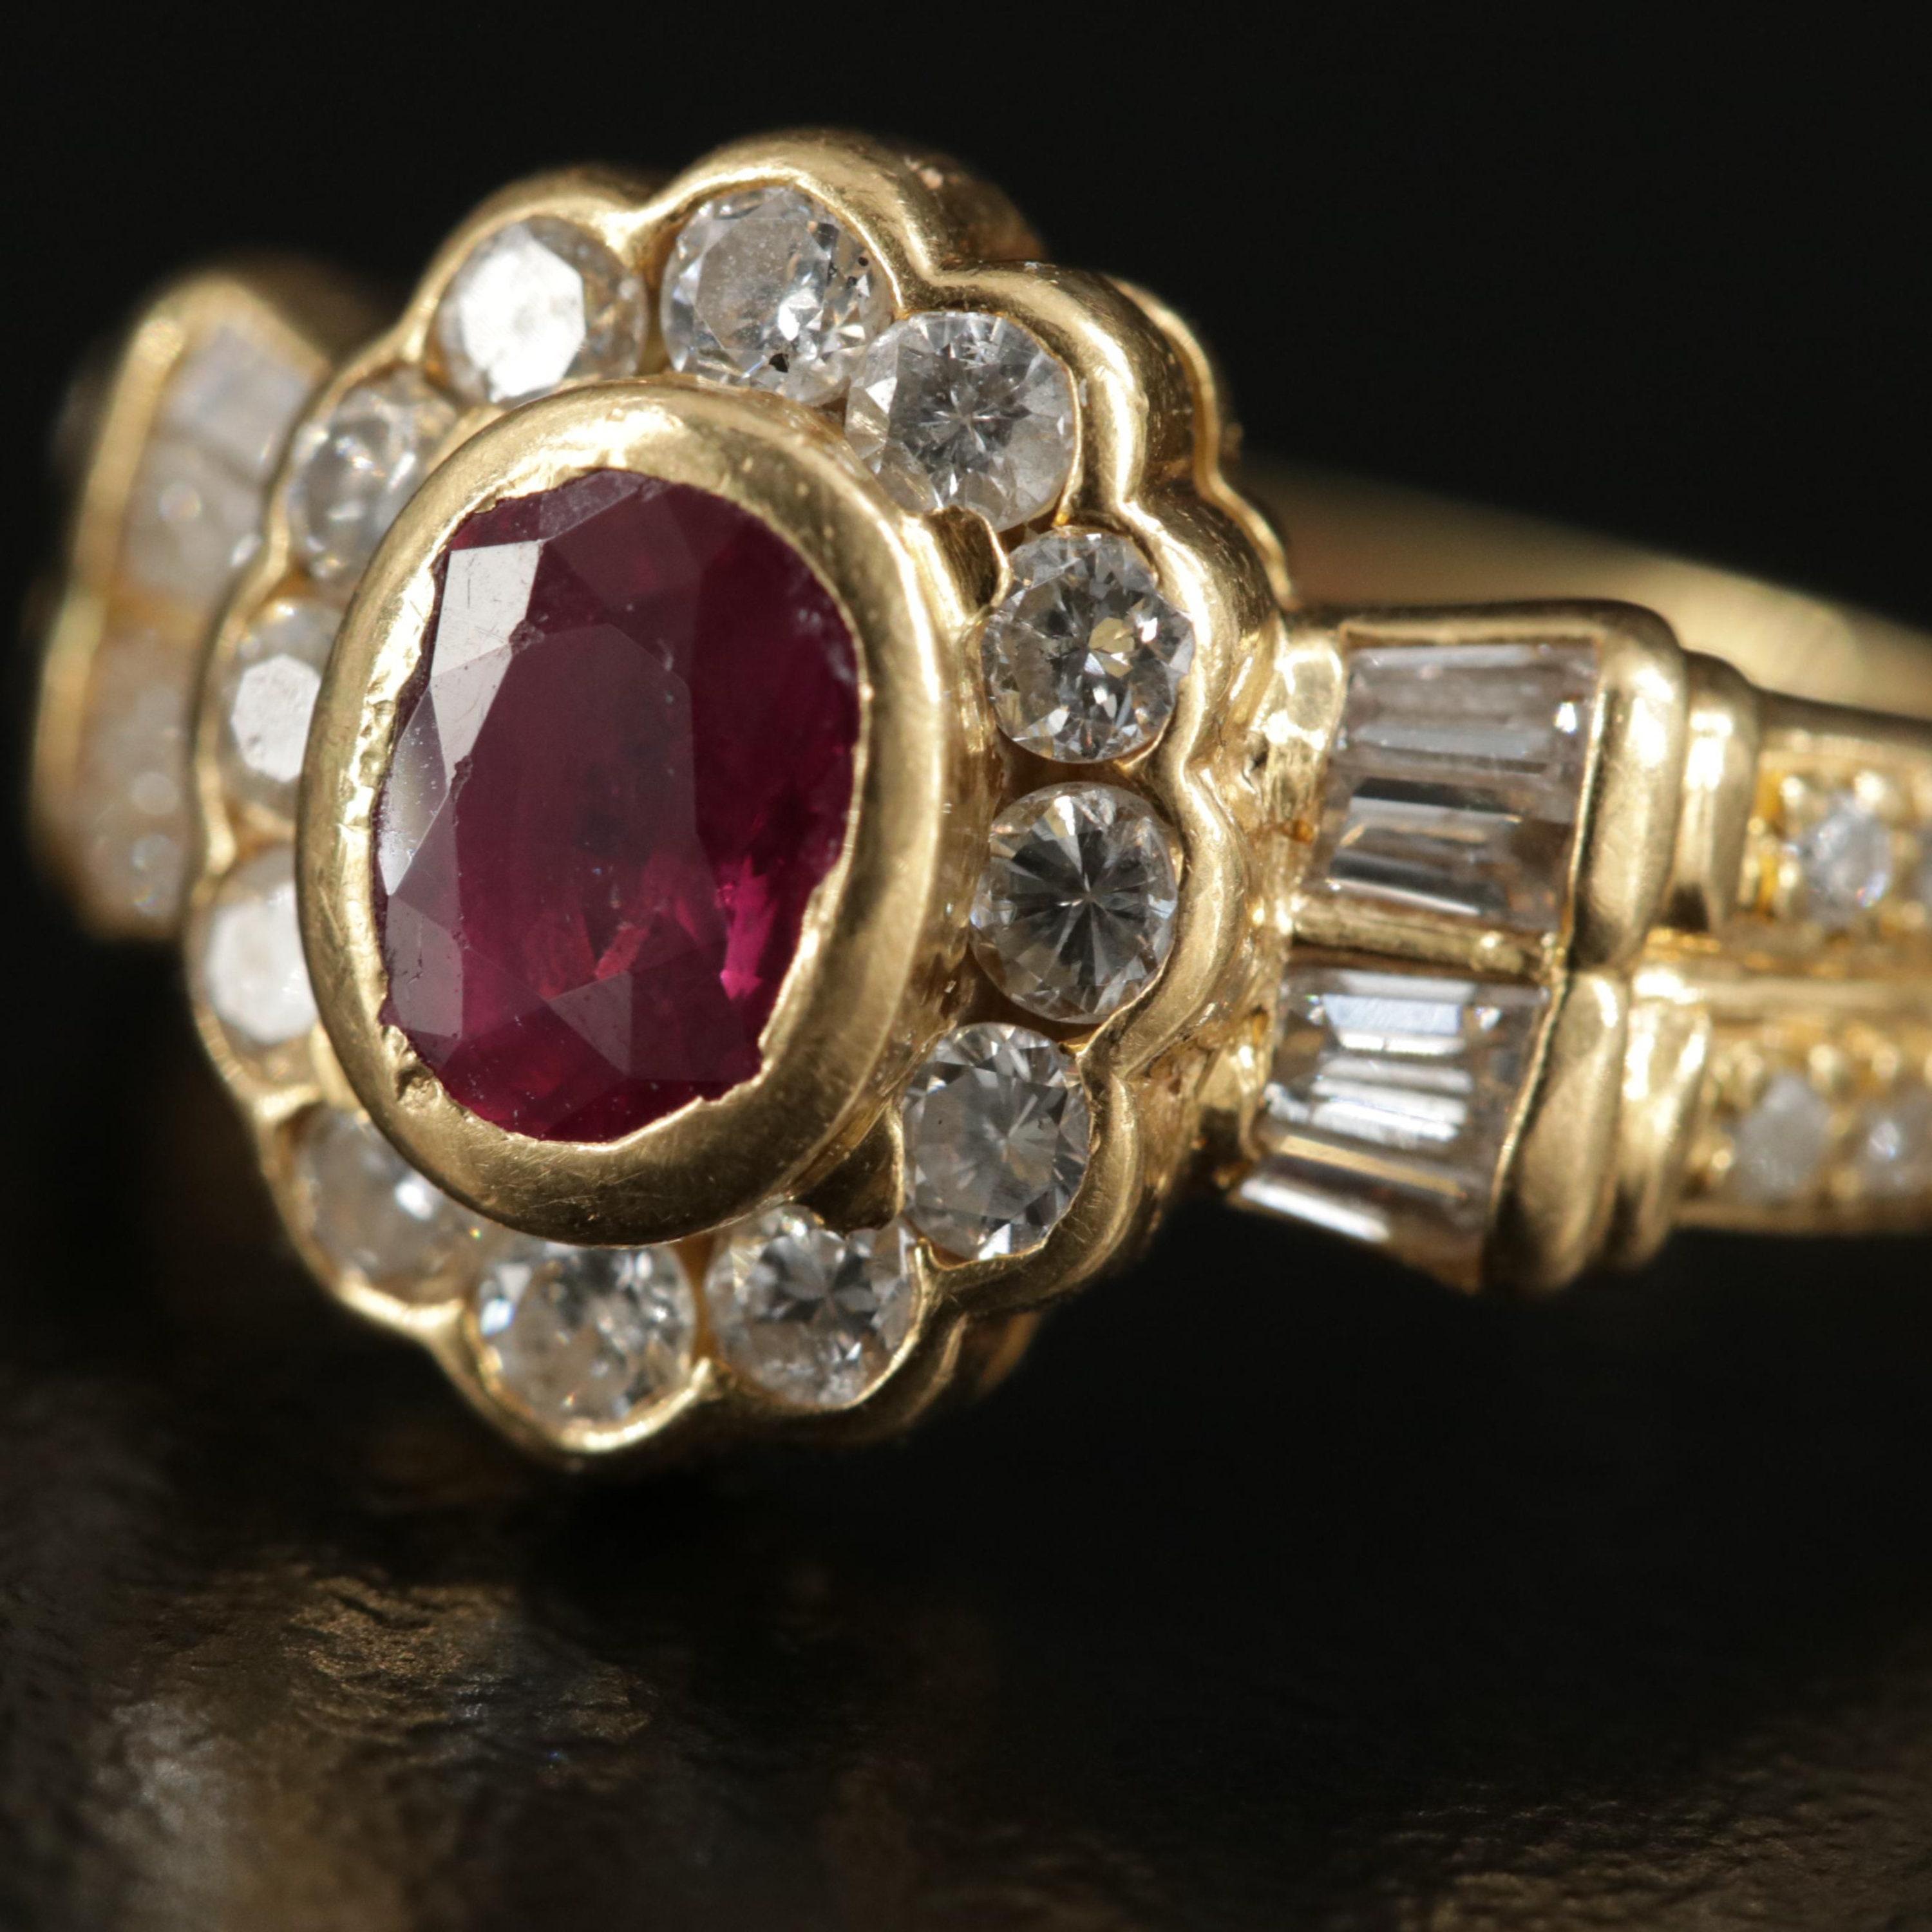 For Sale:  European Oval Cut Ruby Engagement Ring Victorian Ruby Yellow Gold Wedding Ring 5